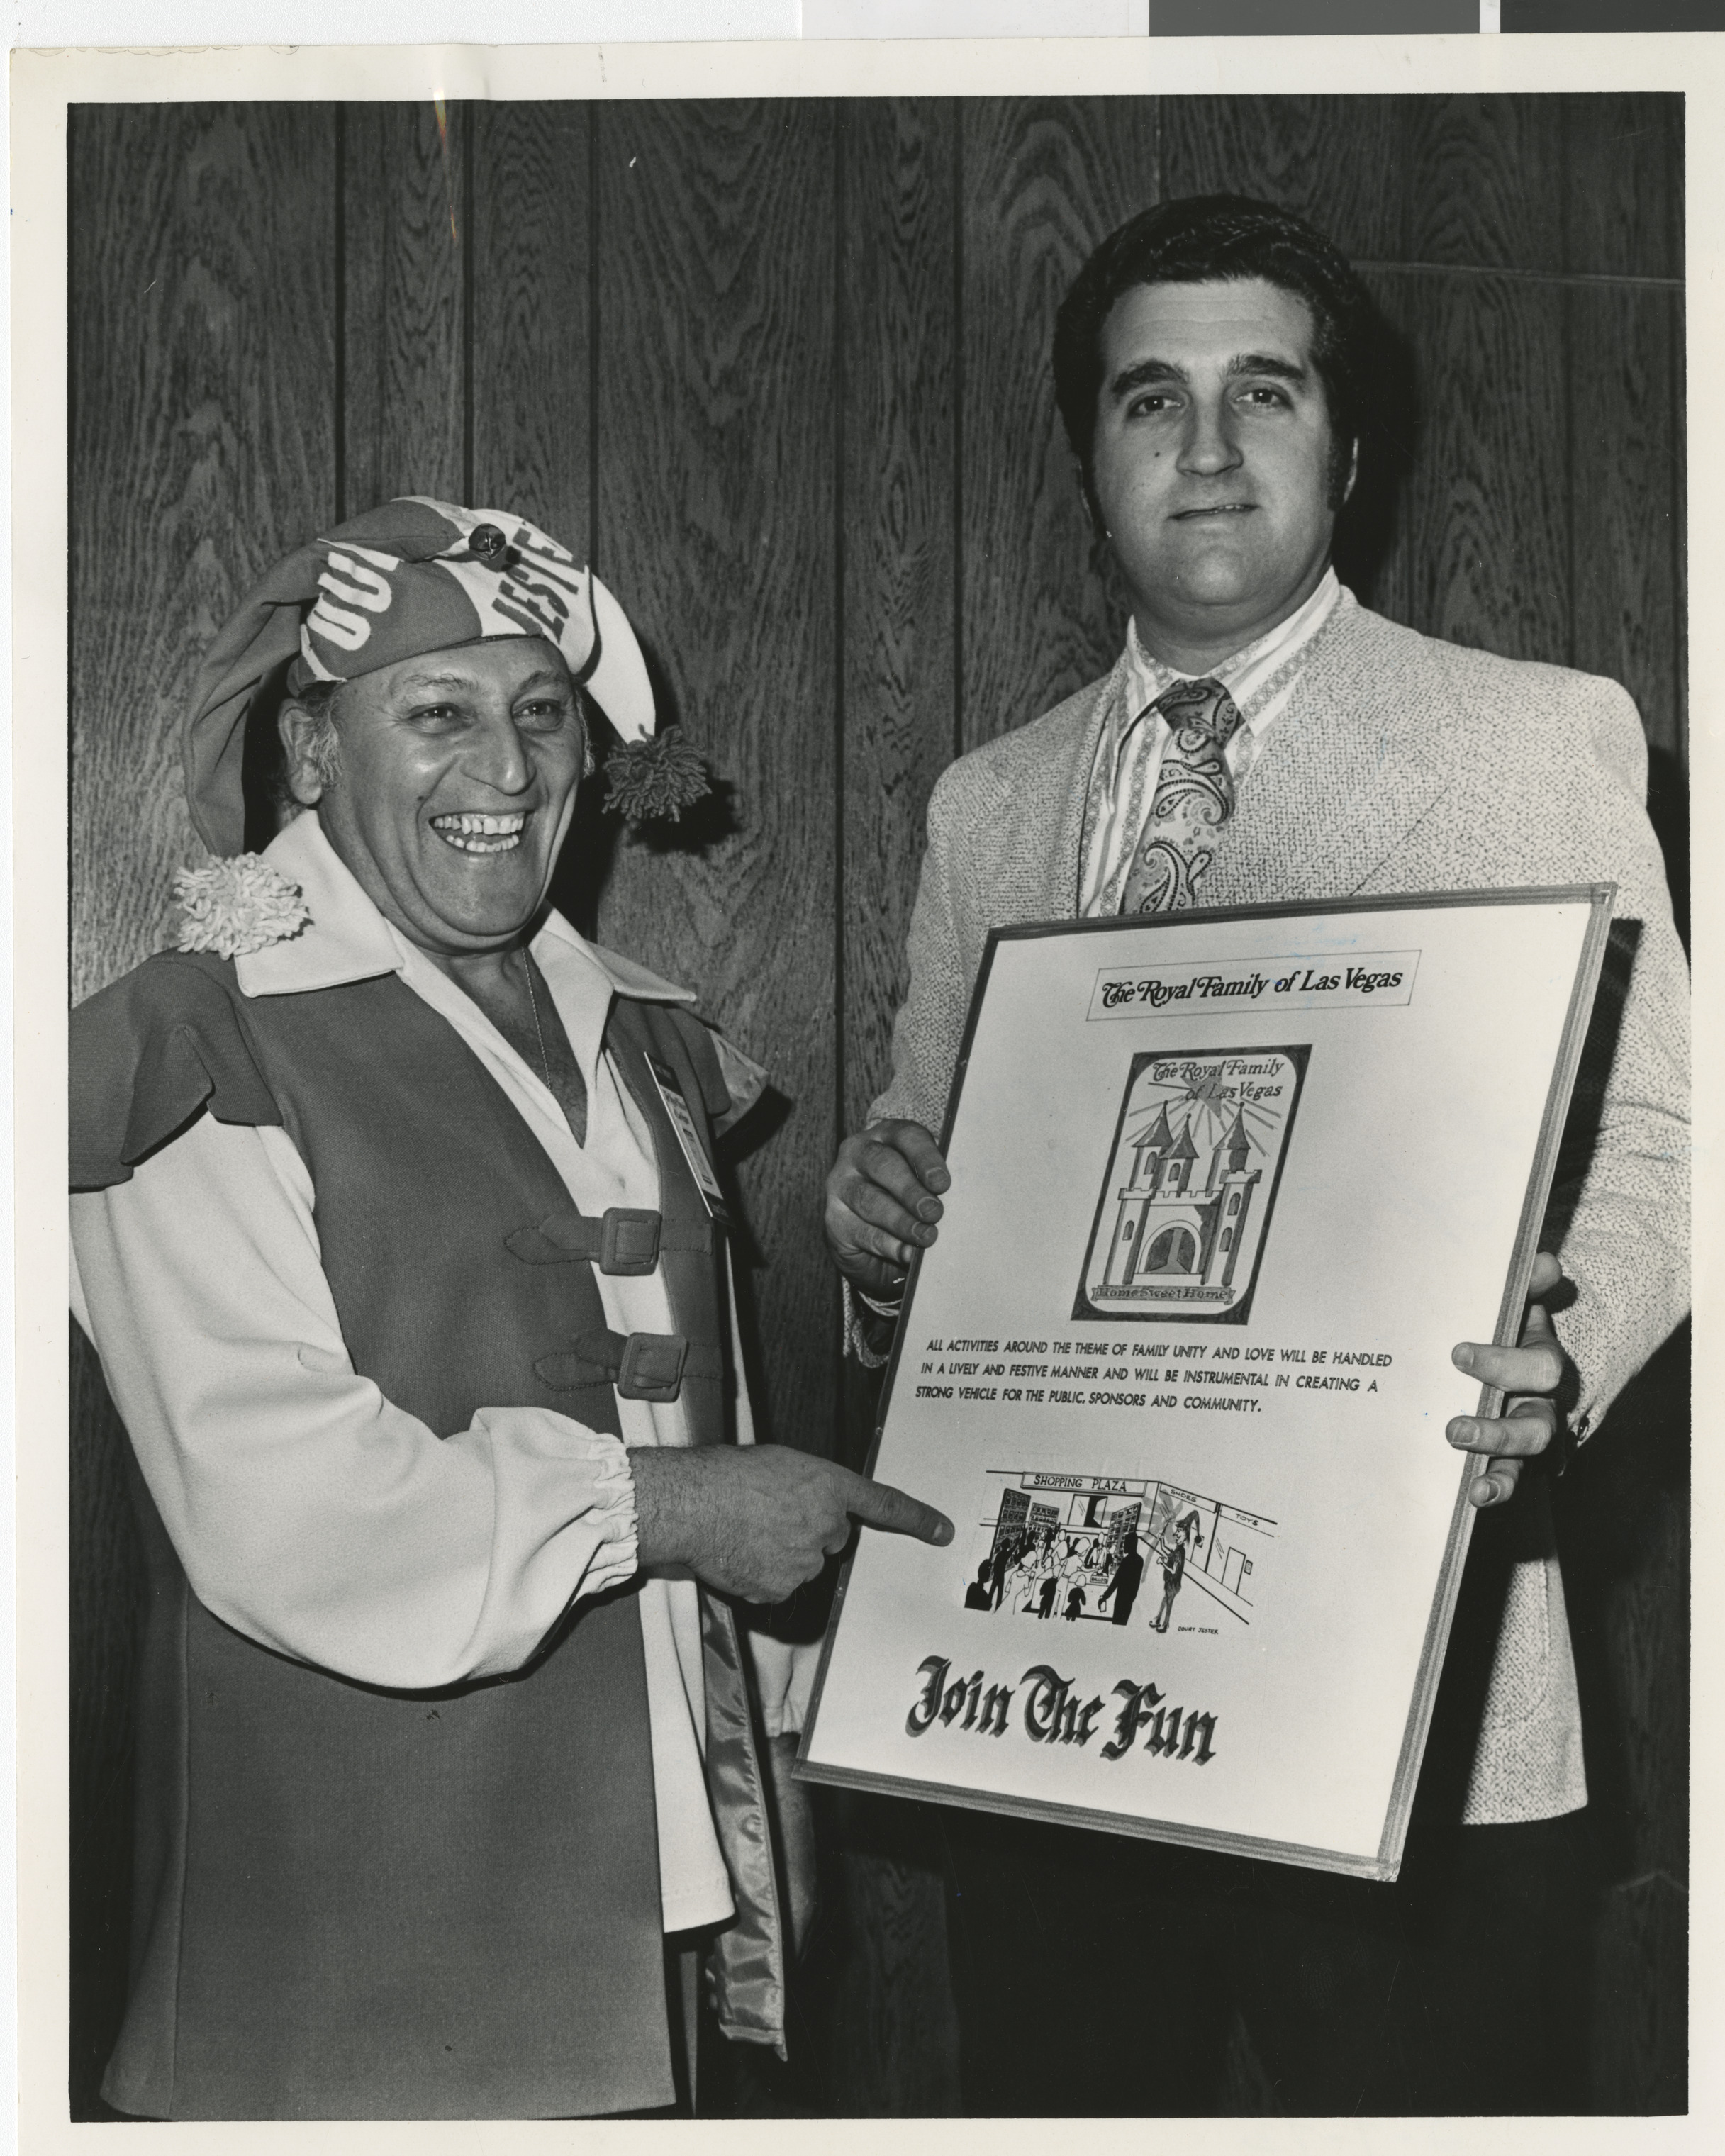 Photograph of Ron Lurie with a framed poster "The Royal Family of Las Vegas," circa 1978